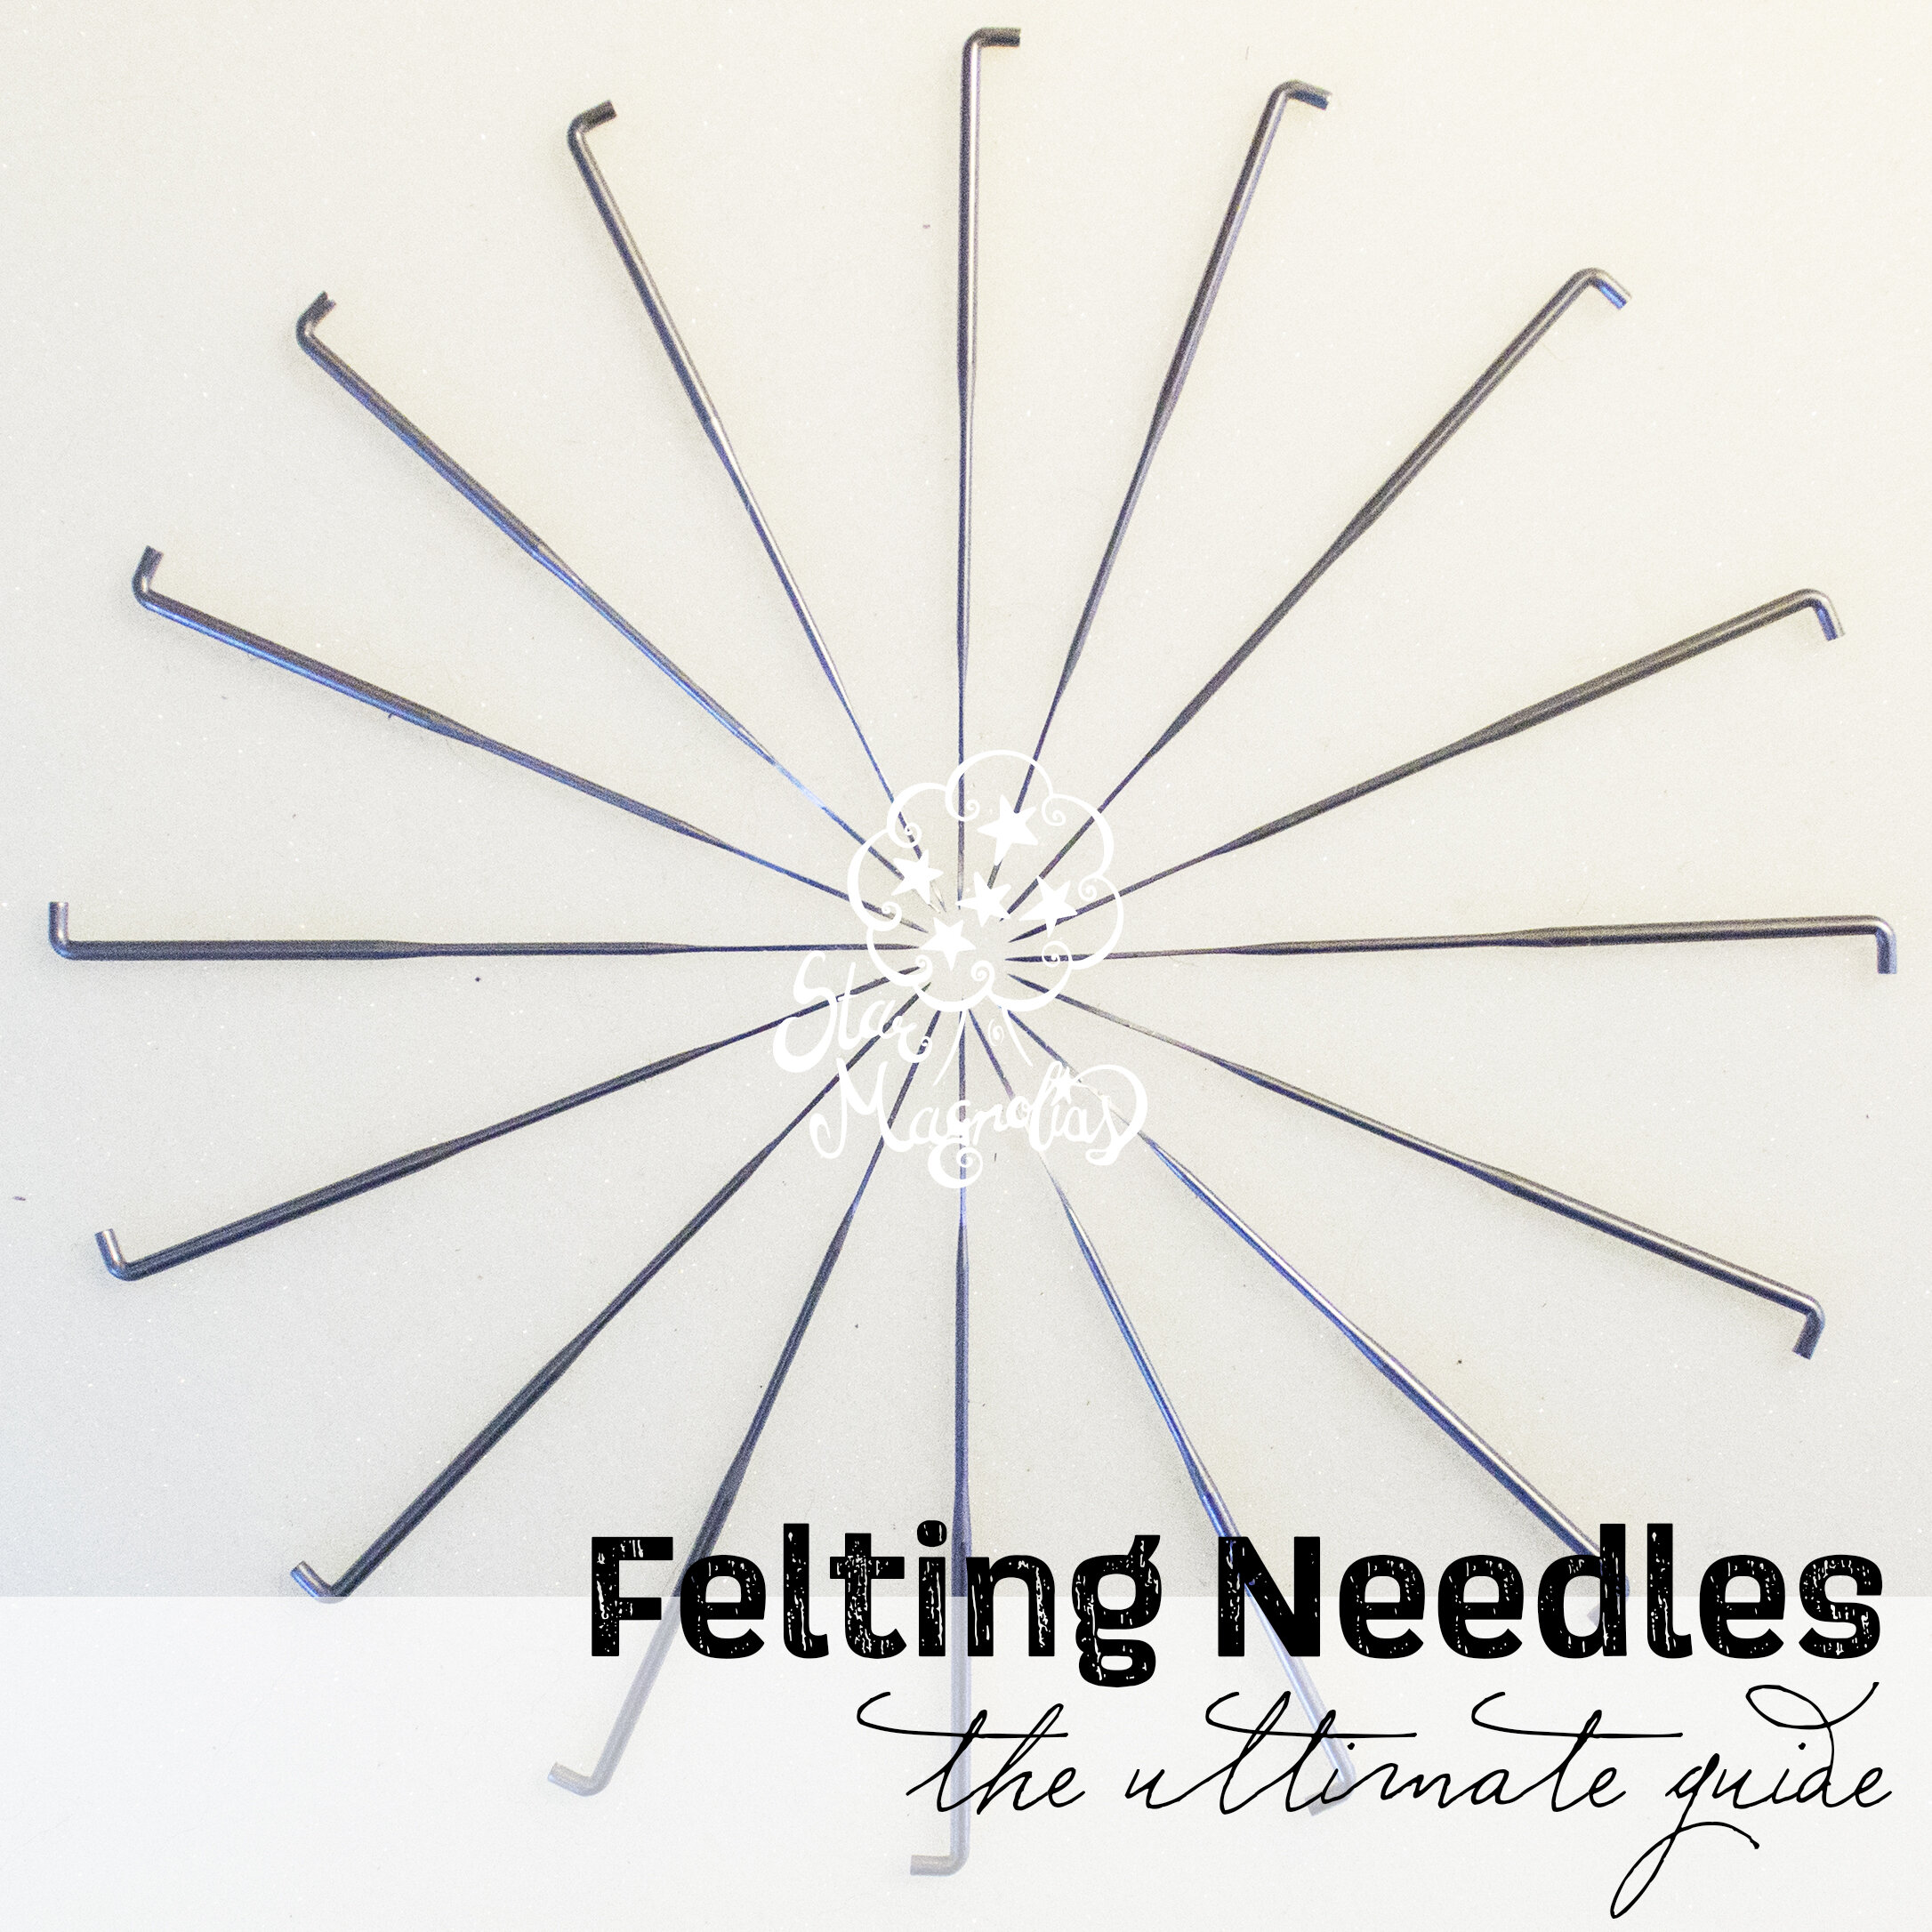 Dimensions® Feltworks® Replacement Felting Needles